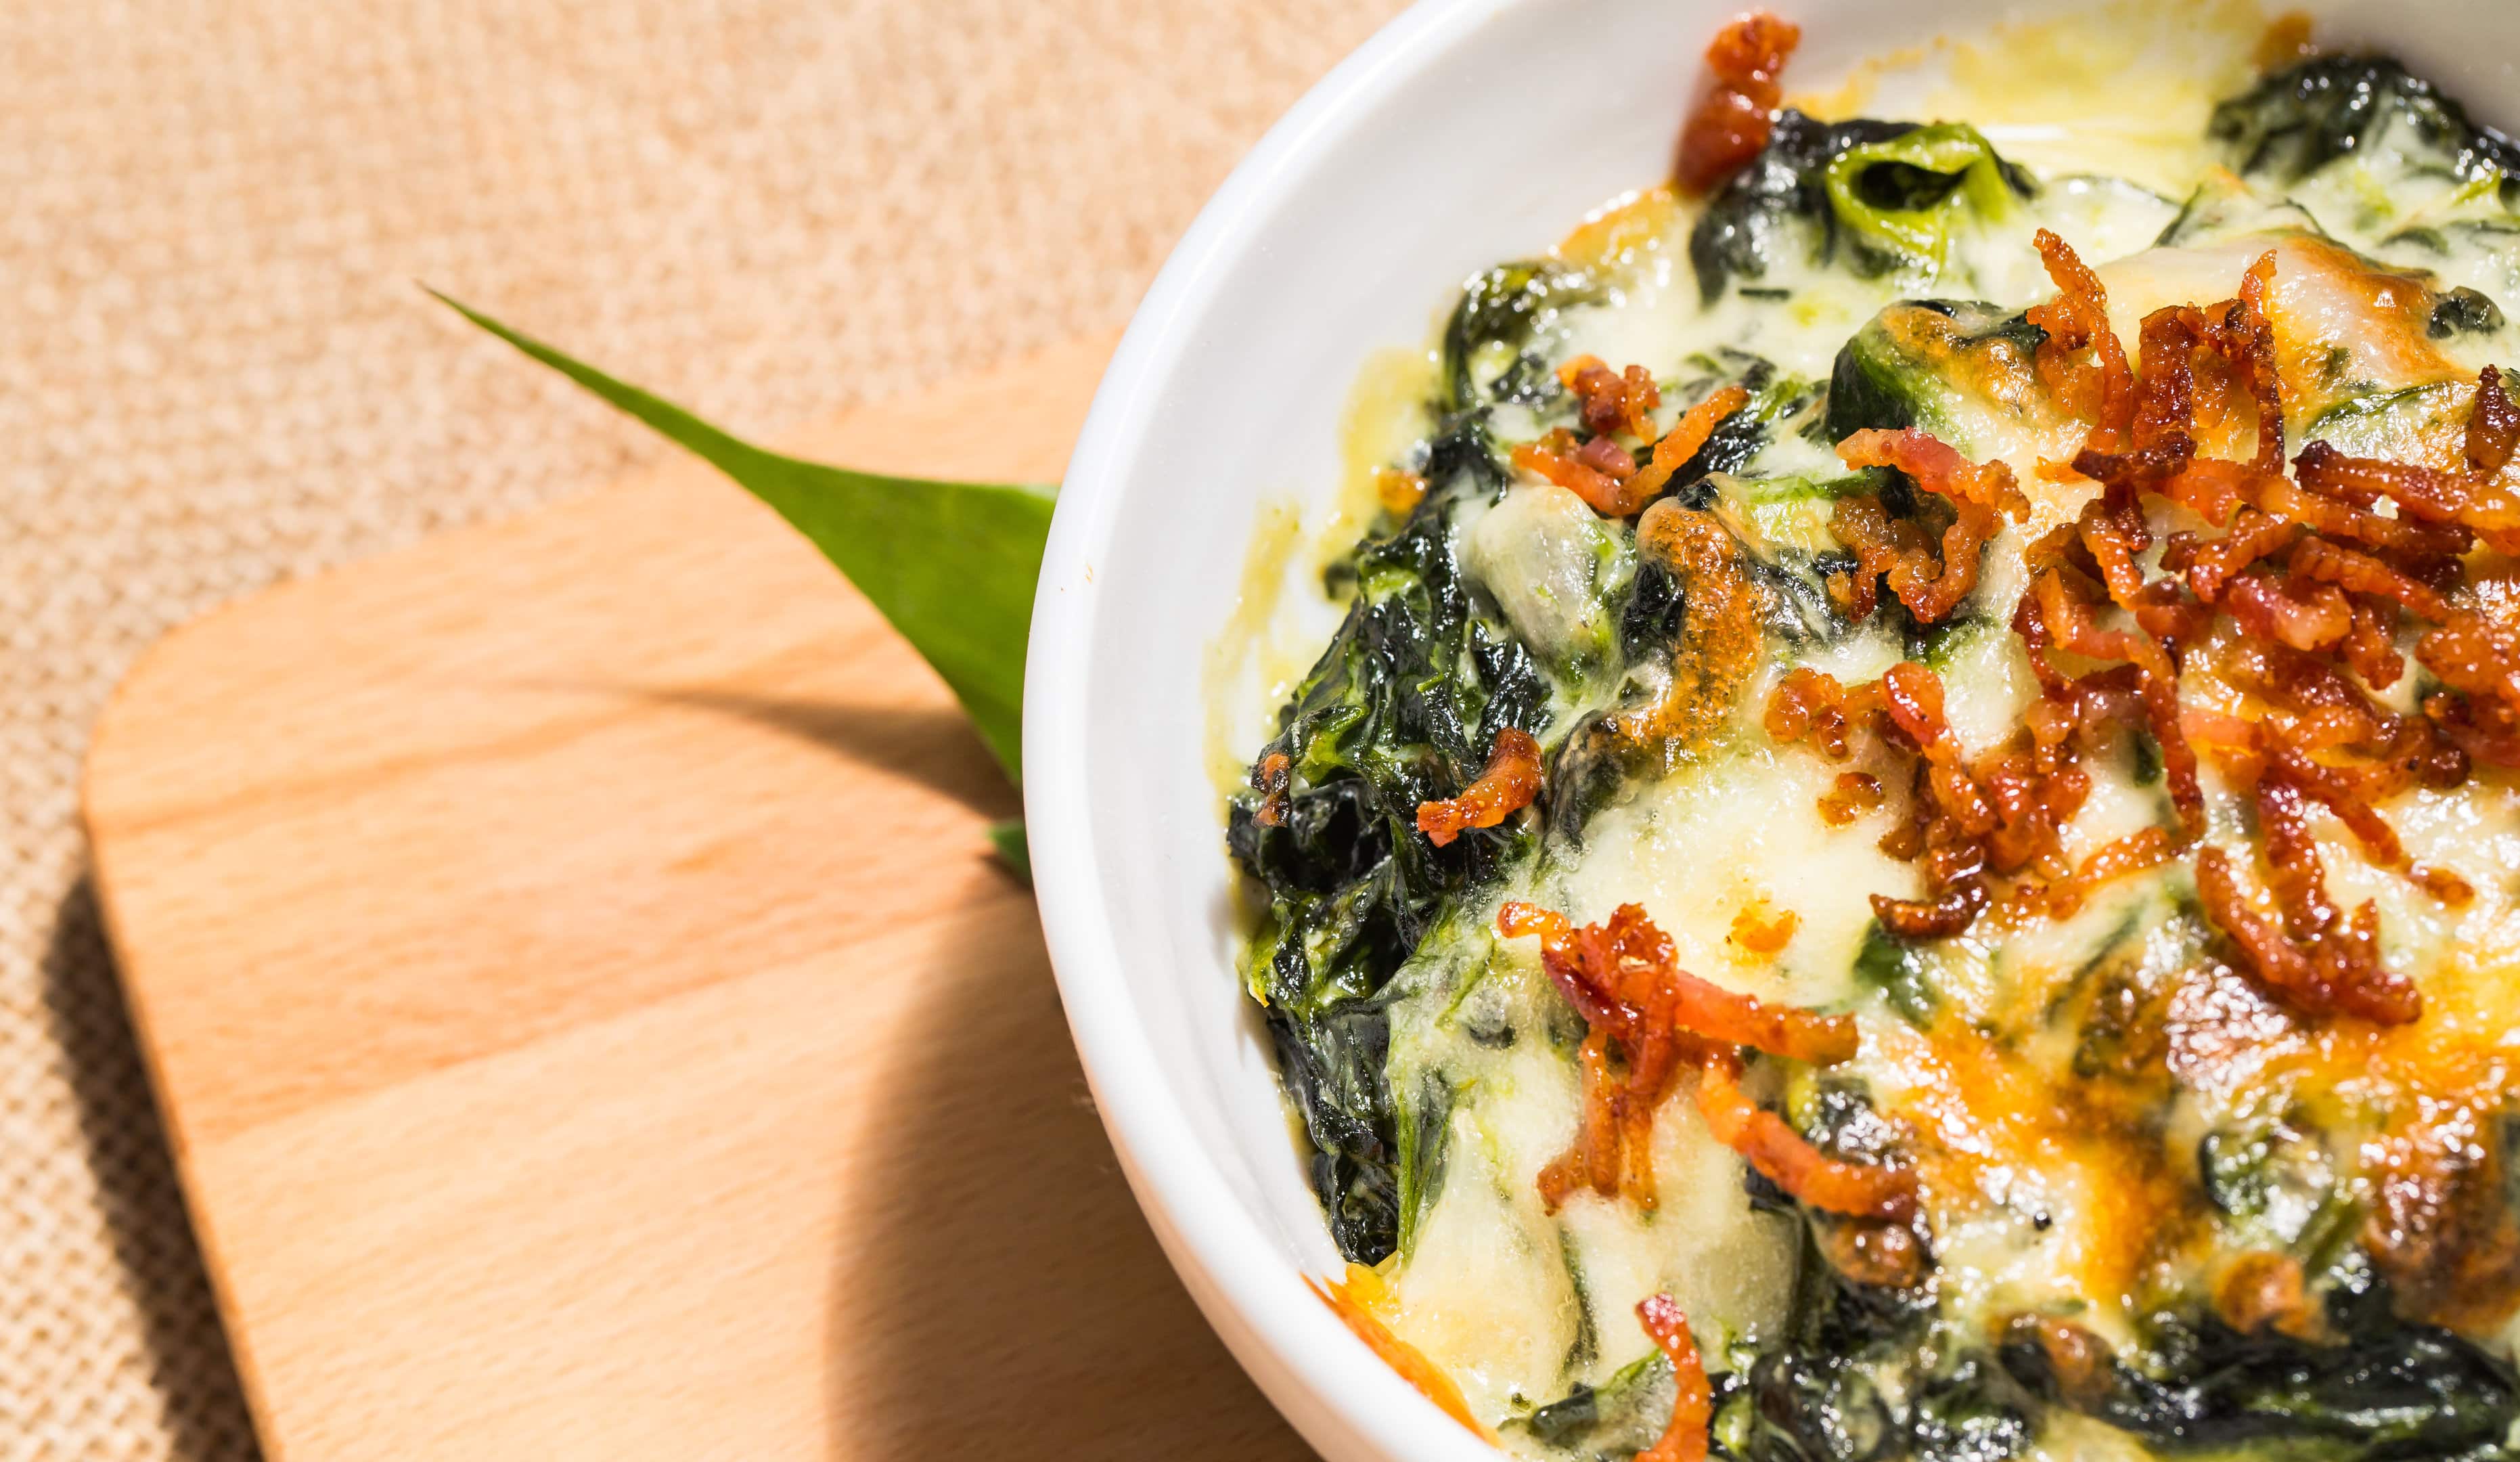 Bowl of fresh Cheddar’s spinach dip recipe with fried minced sweet pork